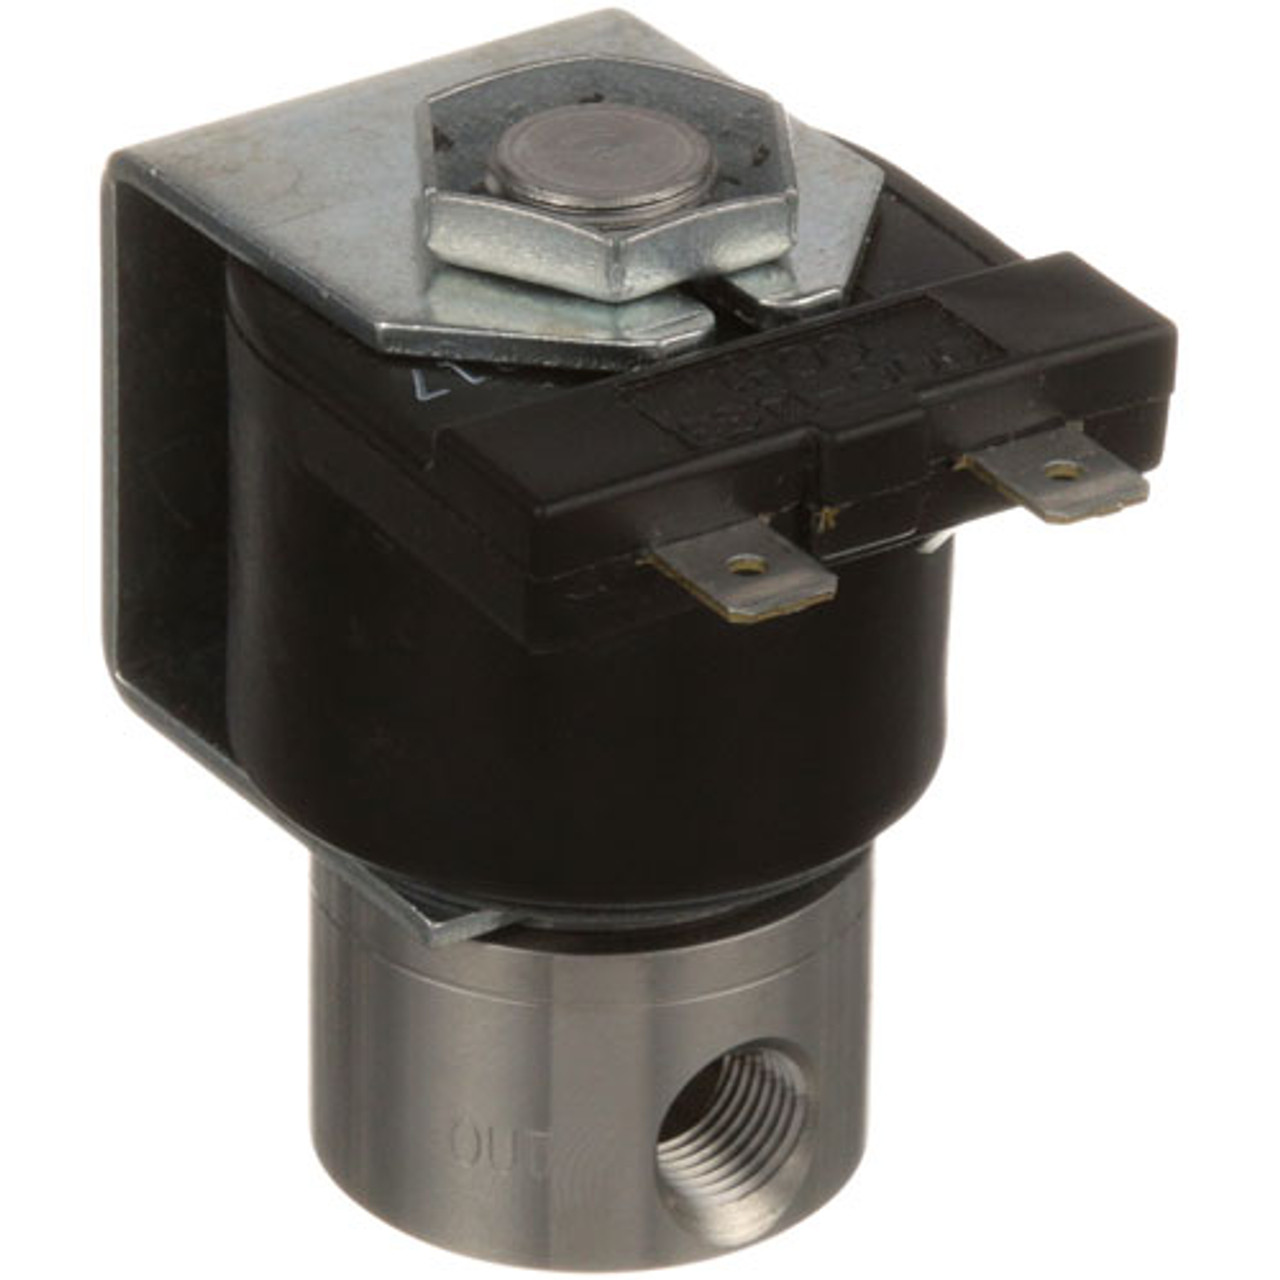 Water Valve - 120V - Replacement Part For Bunn 01085.0000